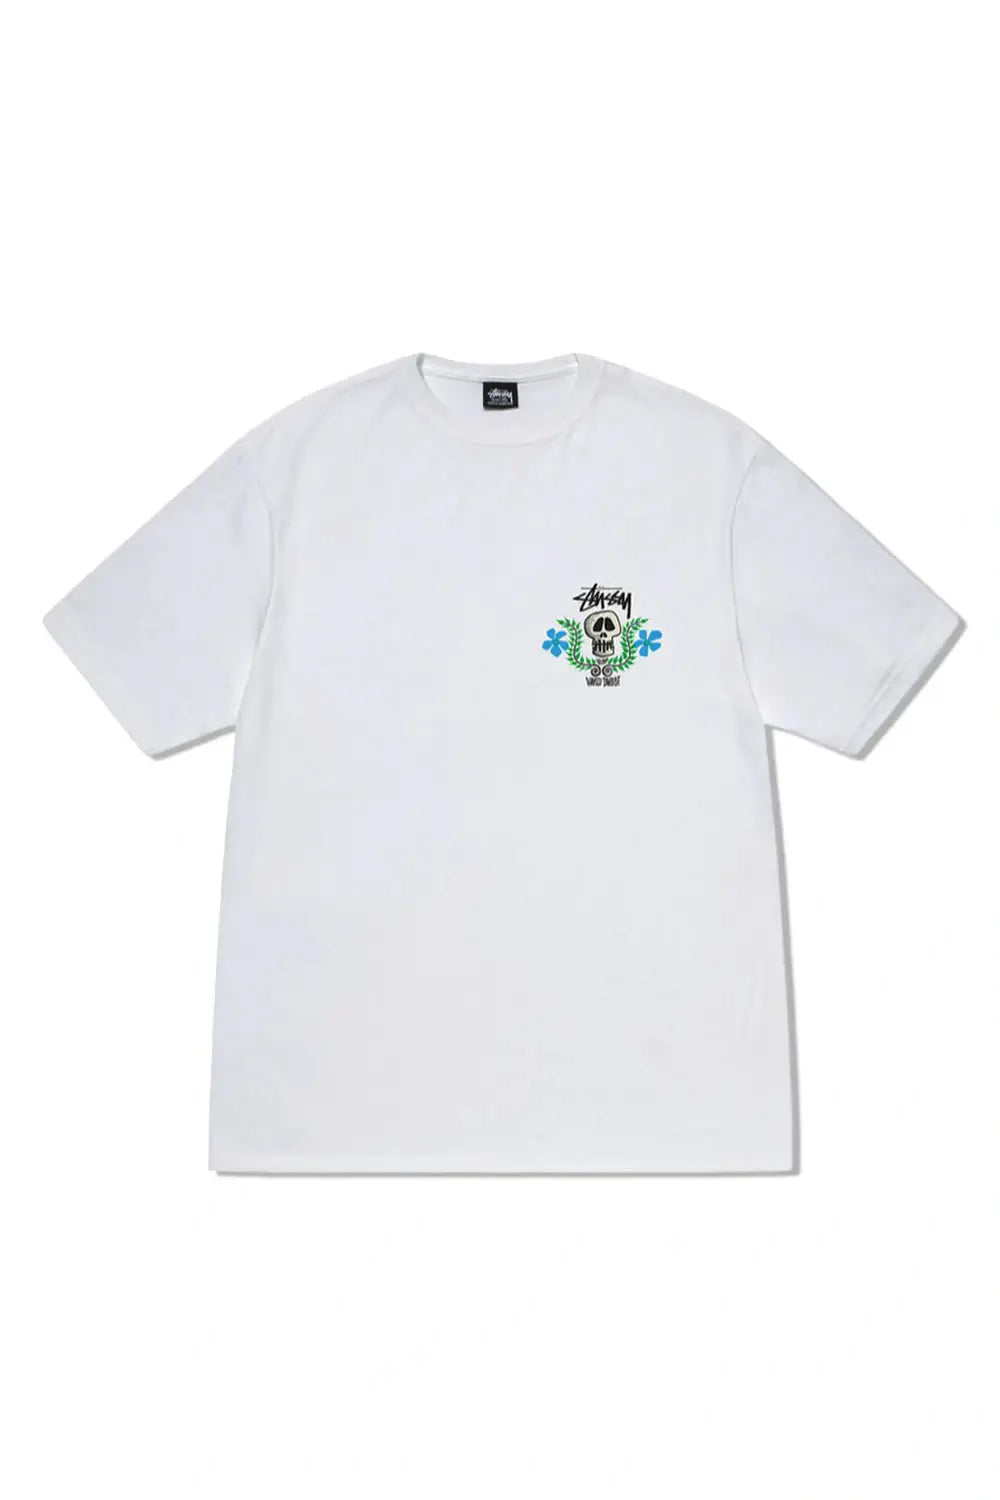 STUSSY Skull crest heavy weight ss tee - Pigment washed white